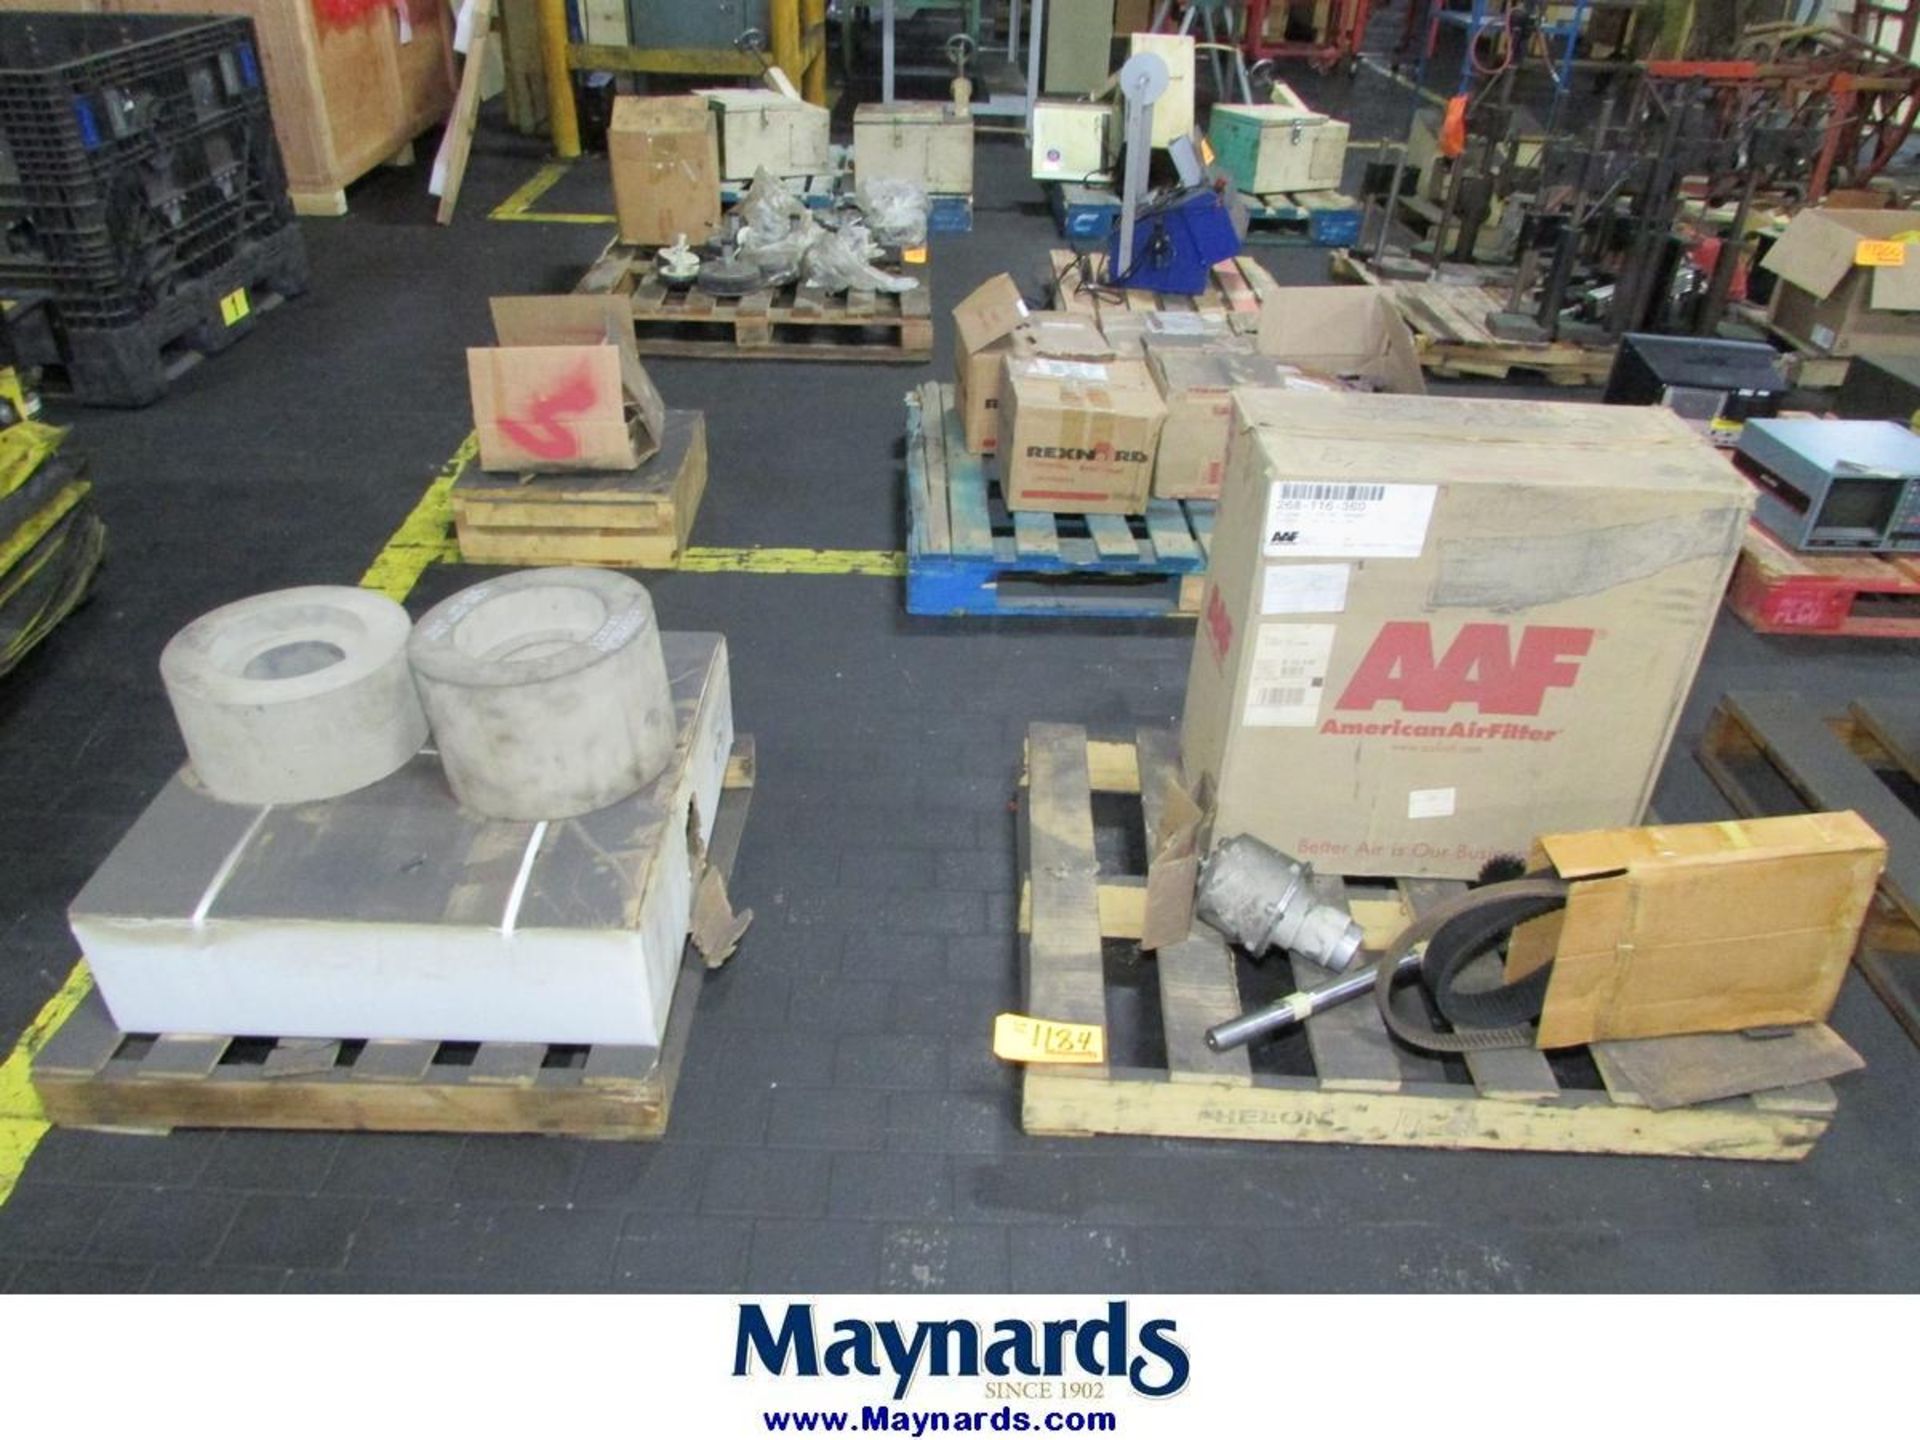 (4) Pallets of Assorted Machine Parts